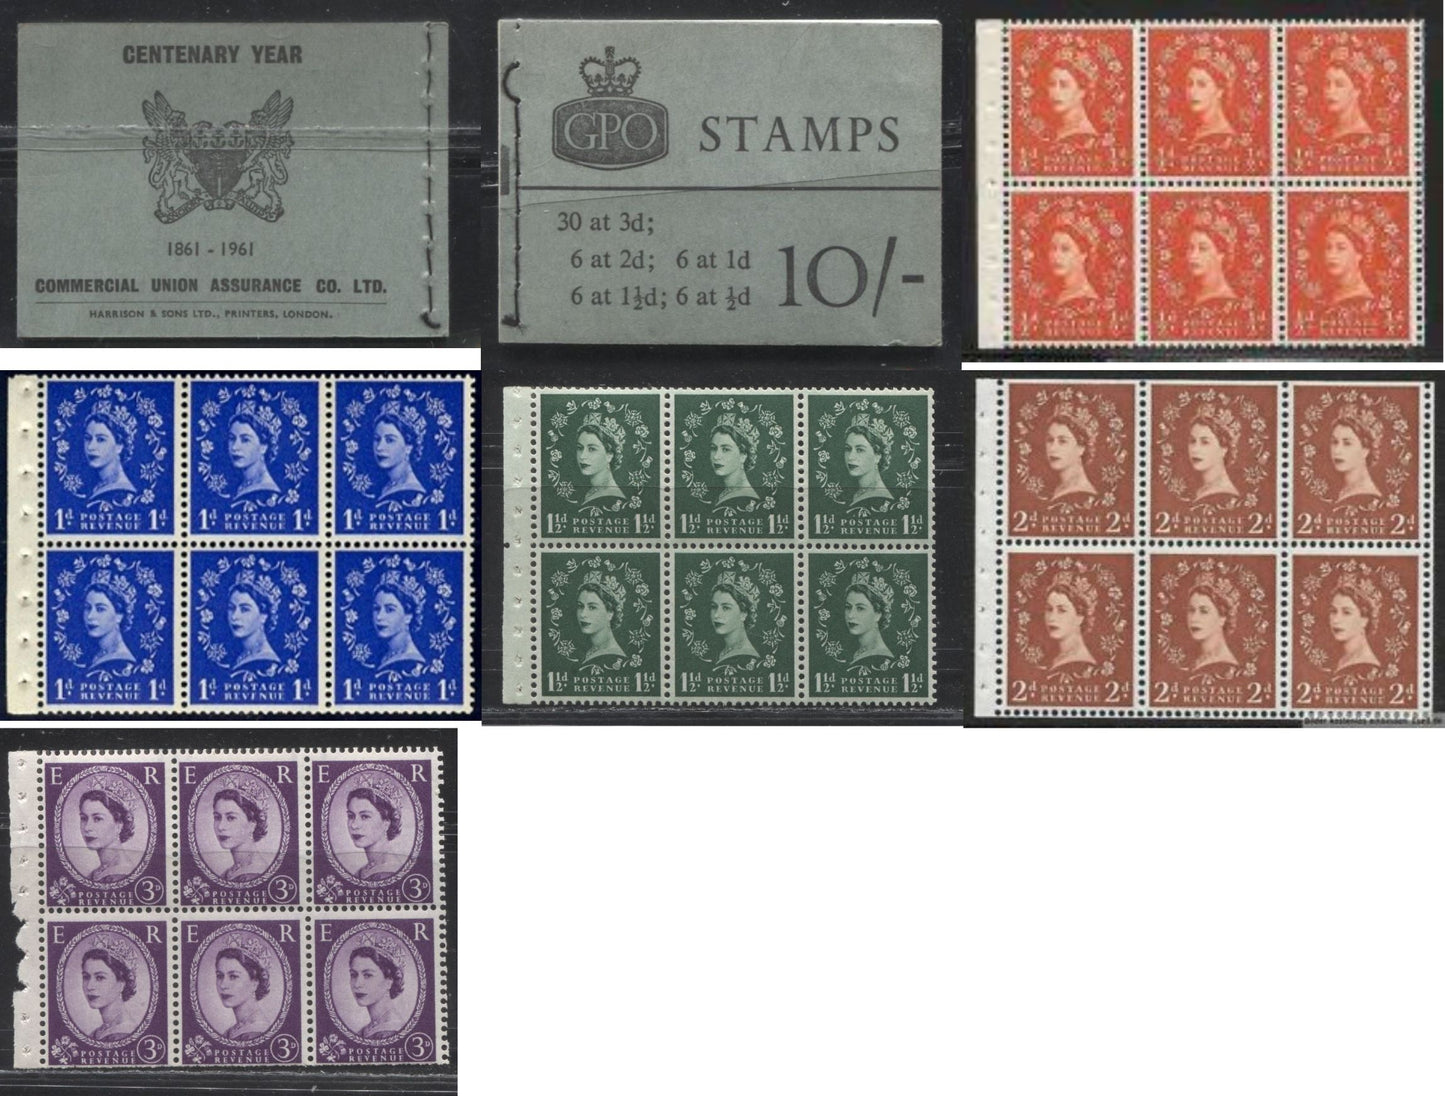 Great Britain SG#X1 10/- Greenish Grey & Black Cover 1959-1967 Wilding Issue, A Complete Counter Booklet With Mixed Upright and Inverted Multiple St. Edward's Crown Watermark, Panes of 6, Type D GPO Cypher, 1961 Version